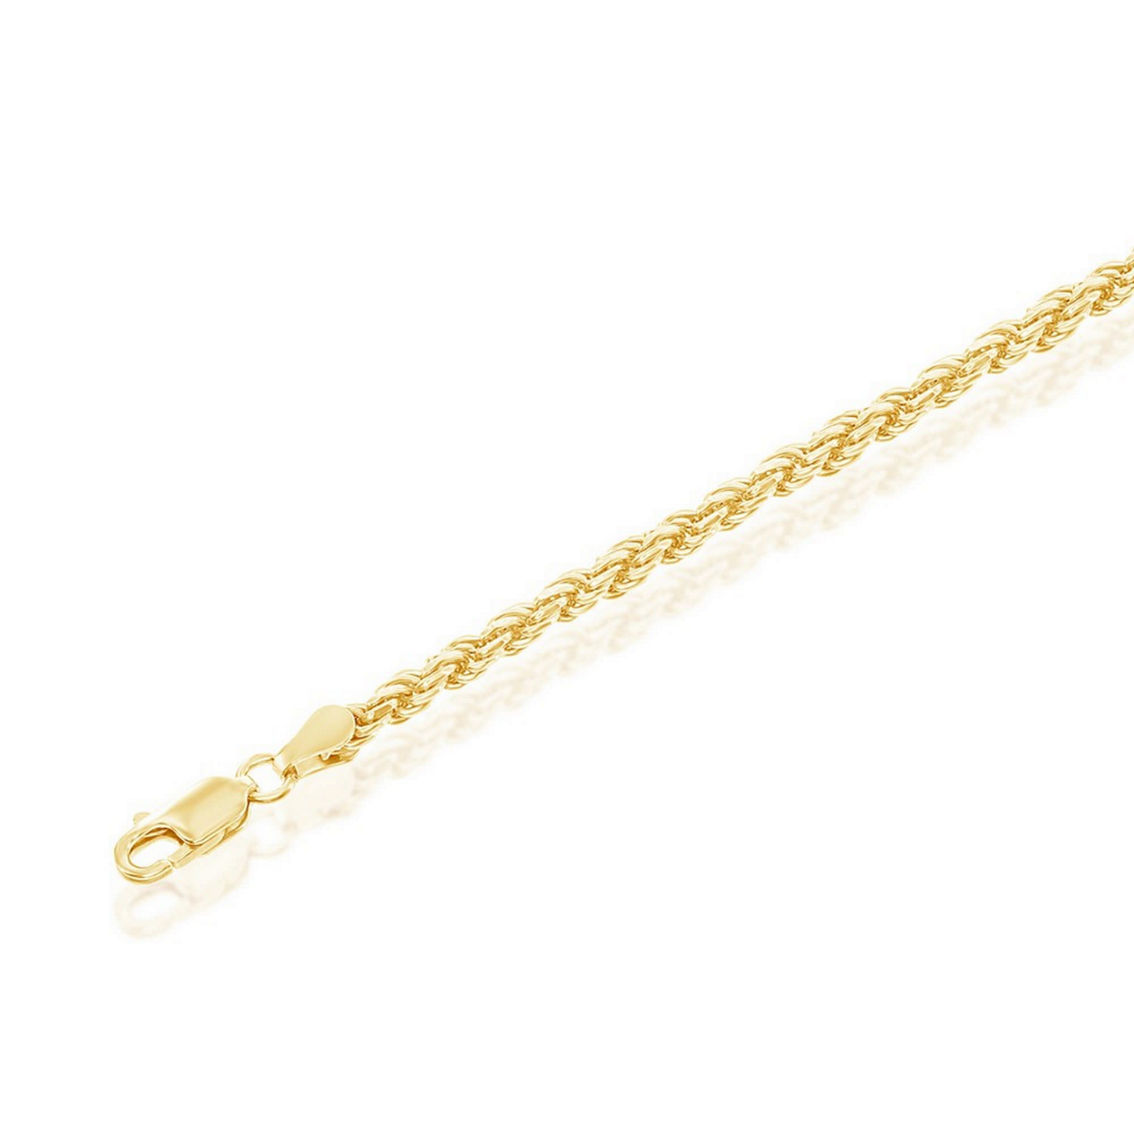 Links of Italy Sterling Silver Solid Diamond-Cut 3mm Rope Chain - Gold Plated - Image 2 of 3